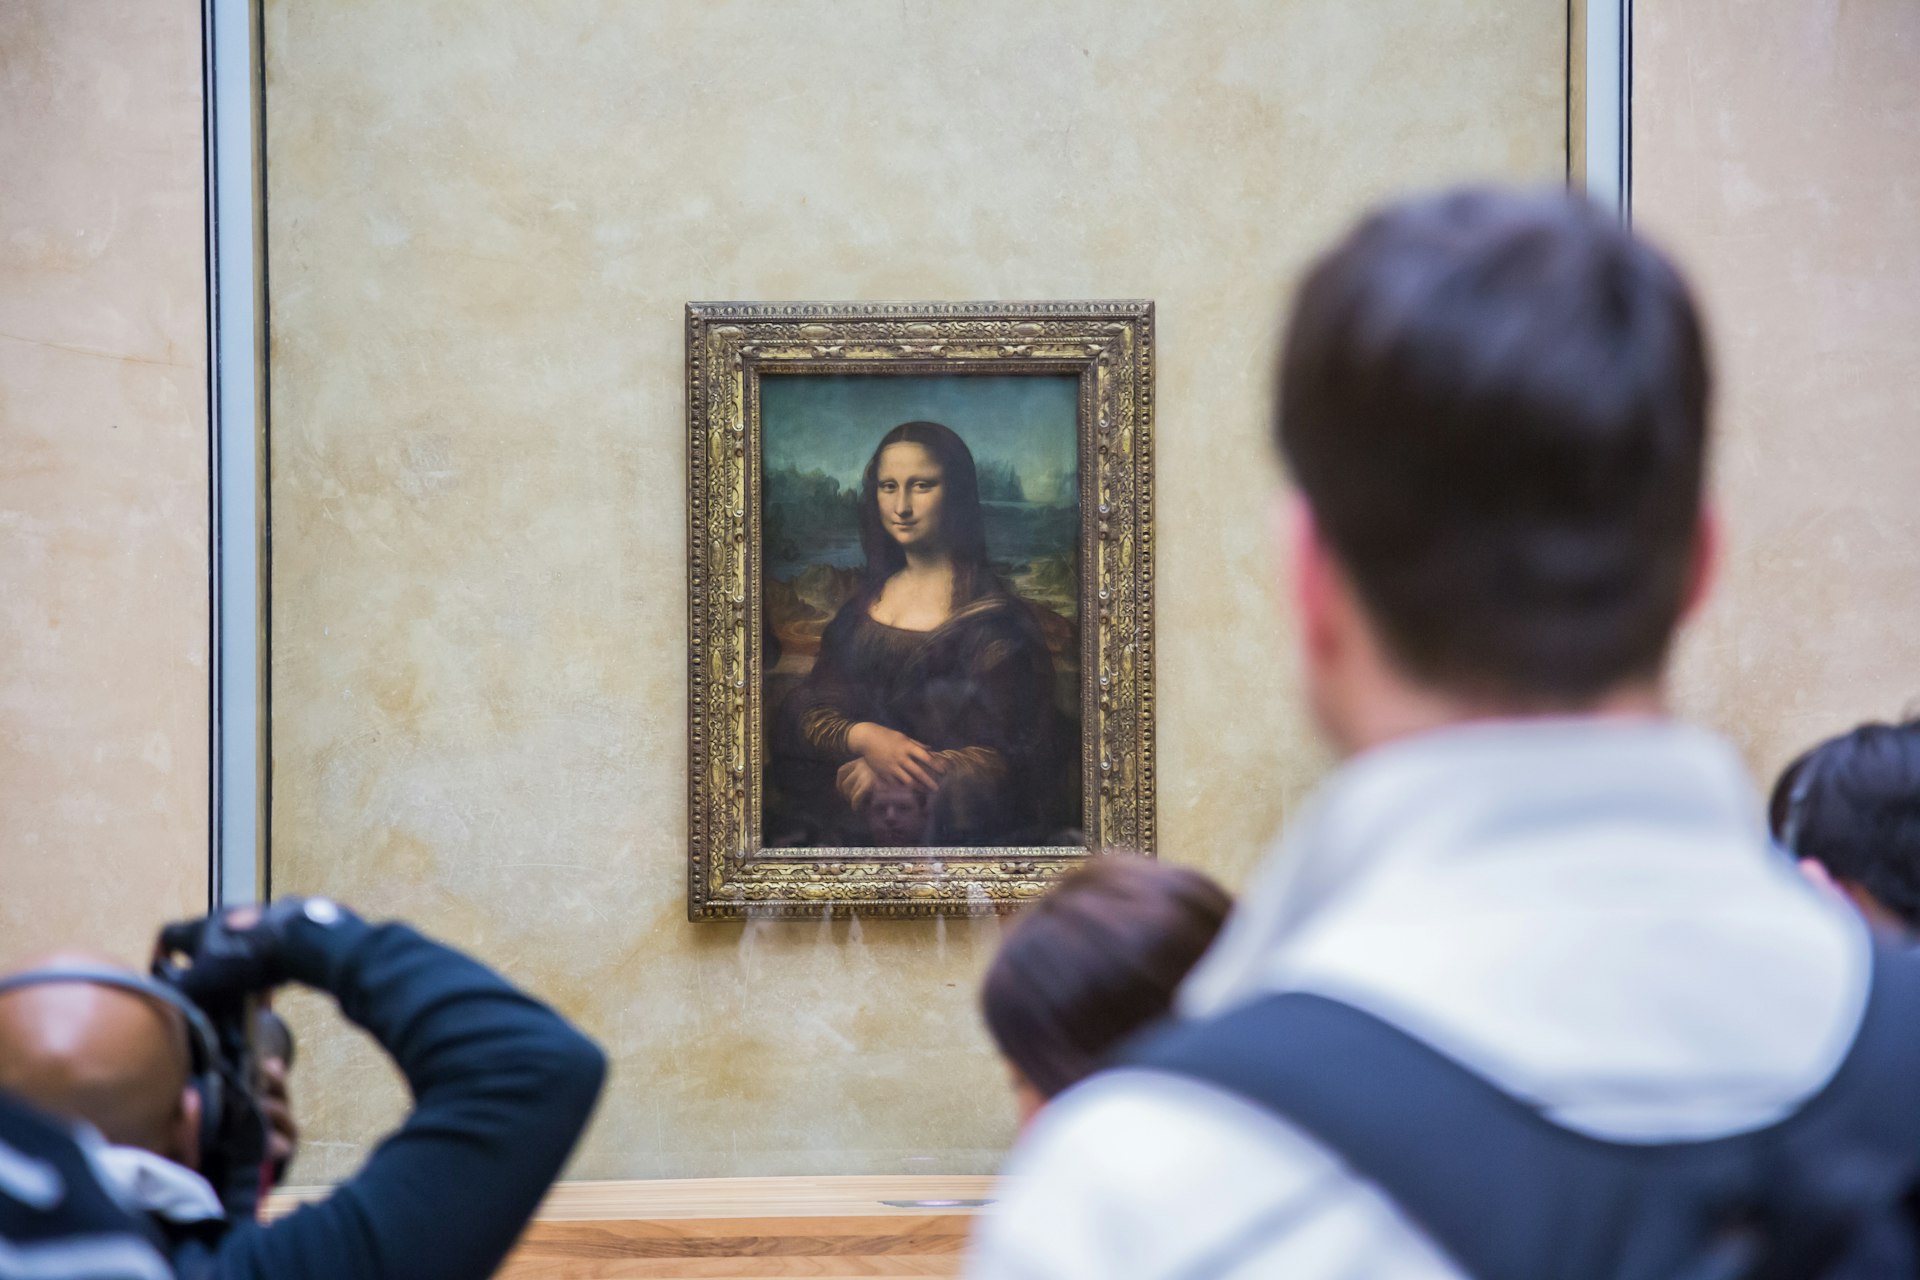 Visitors take photo of Leonardo DaVinci's "Mona Lisa" which hangs on a plain wall at the Louvre Museum, August 4, 2012 in Paris, France. The painting is one of the world's most famous.